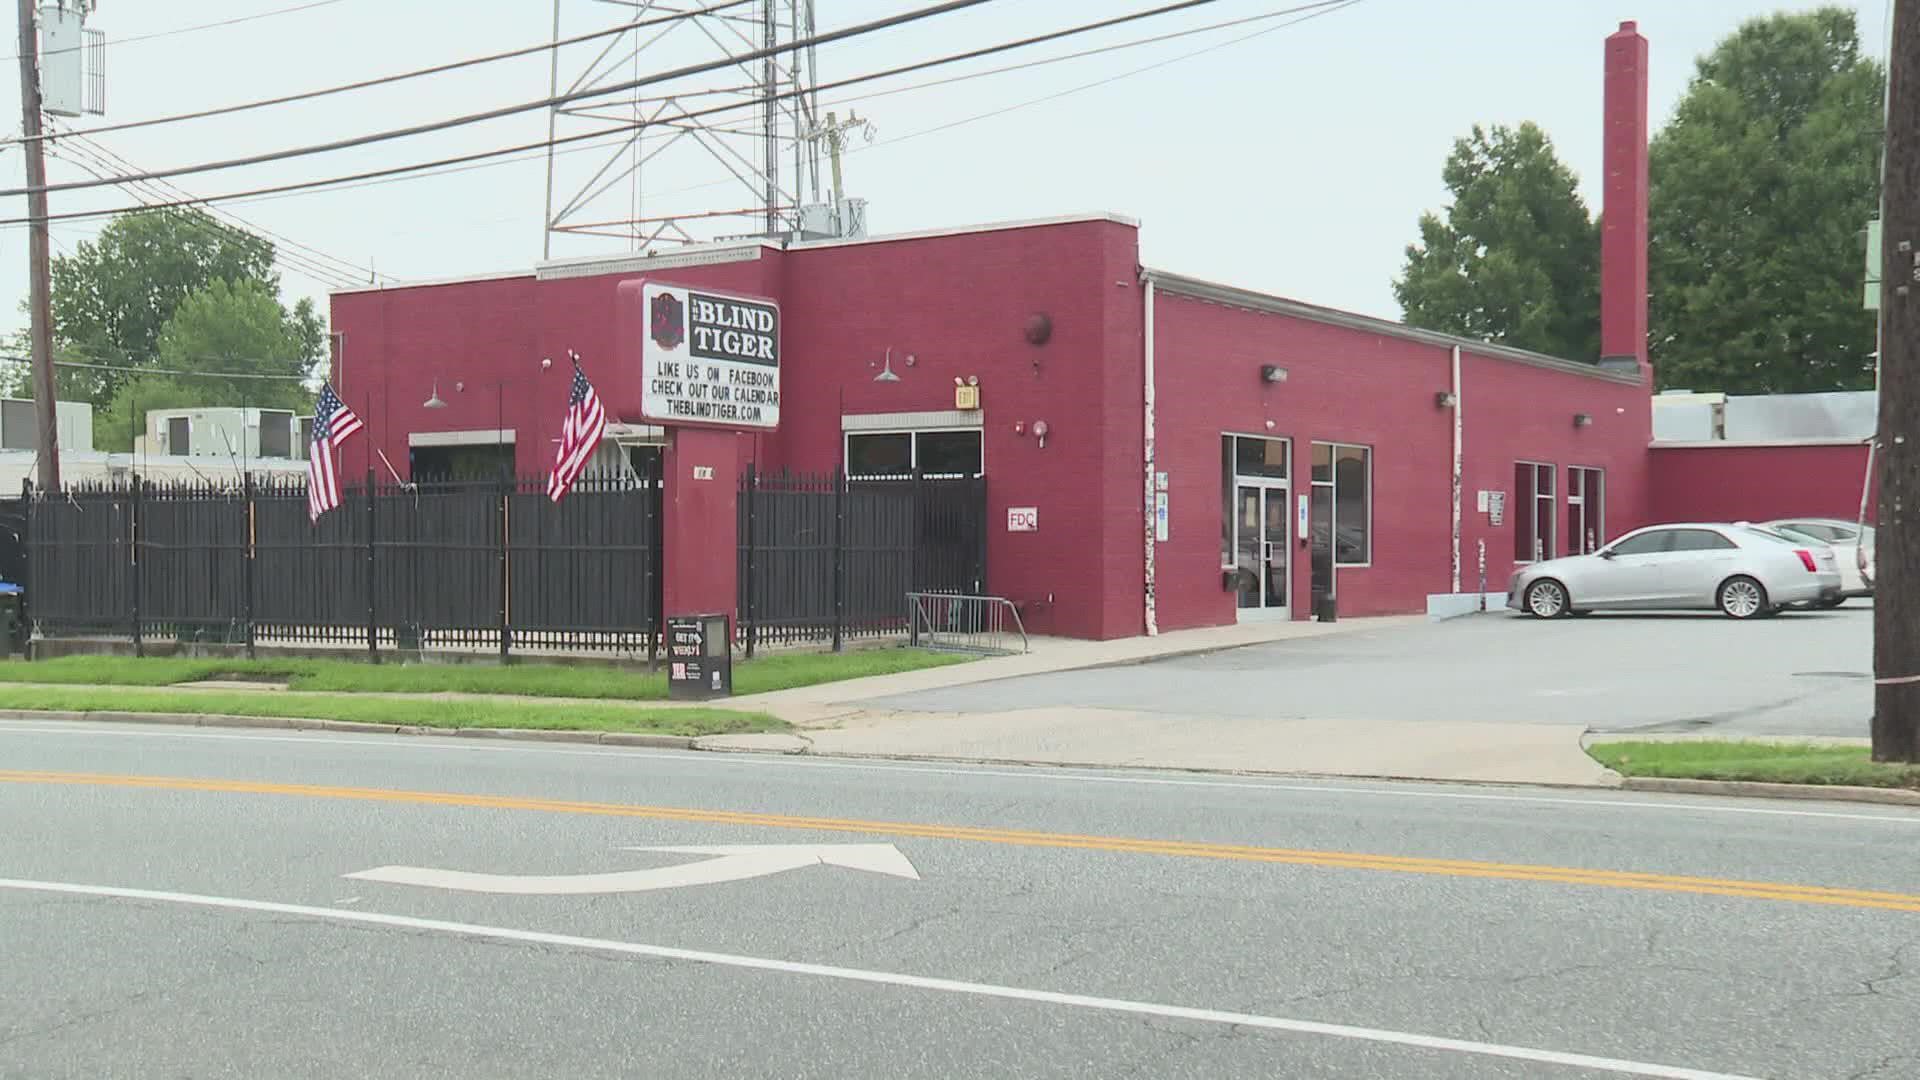 A 19-year-old died in a shooting outside The Blind Tiger in July, prompting a city investigation into the business.